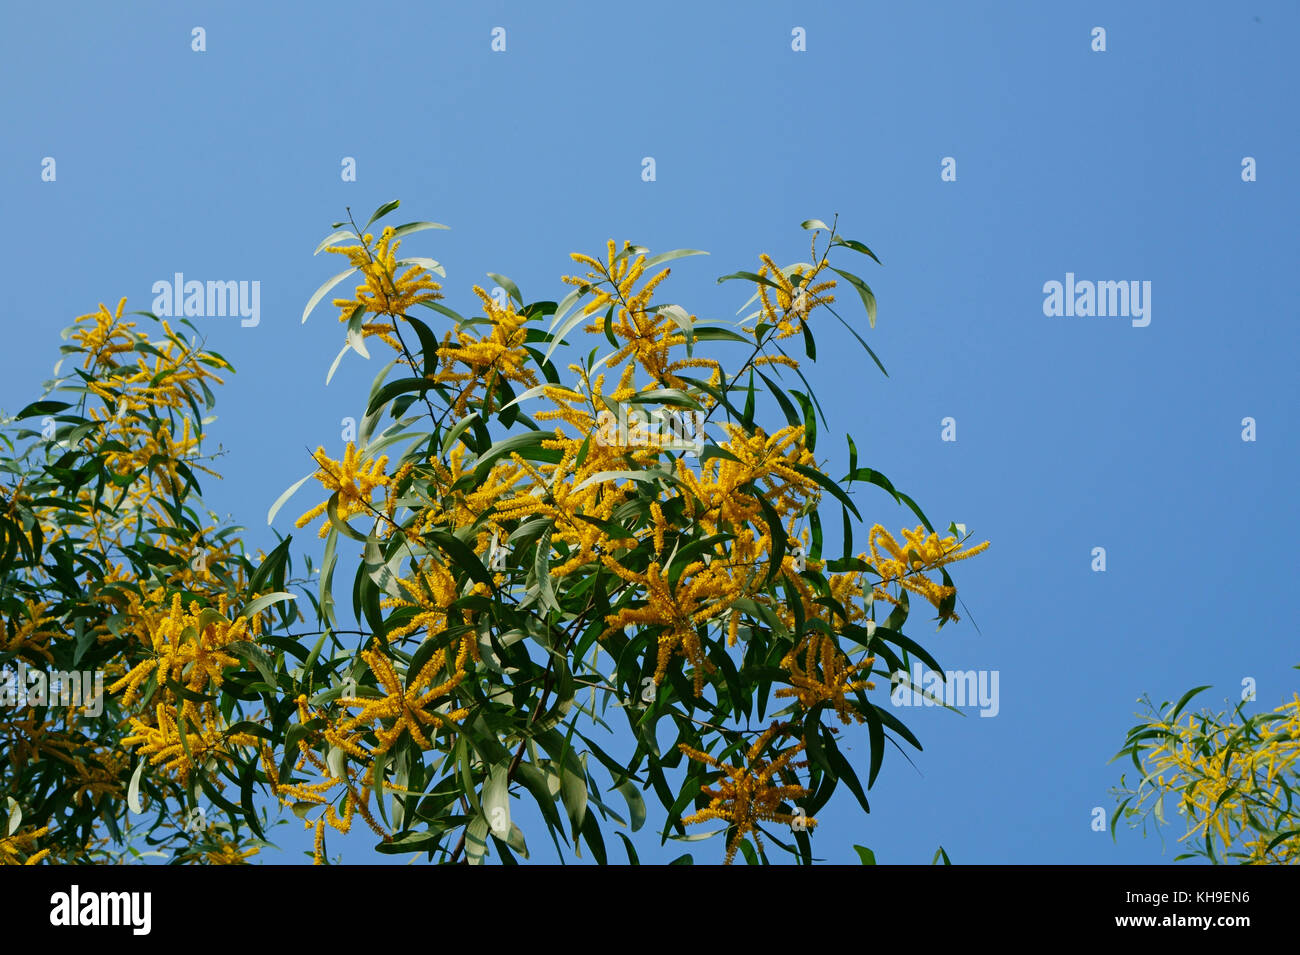 Acacia yellow flowers against blue sky Stock Photo